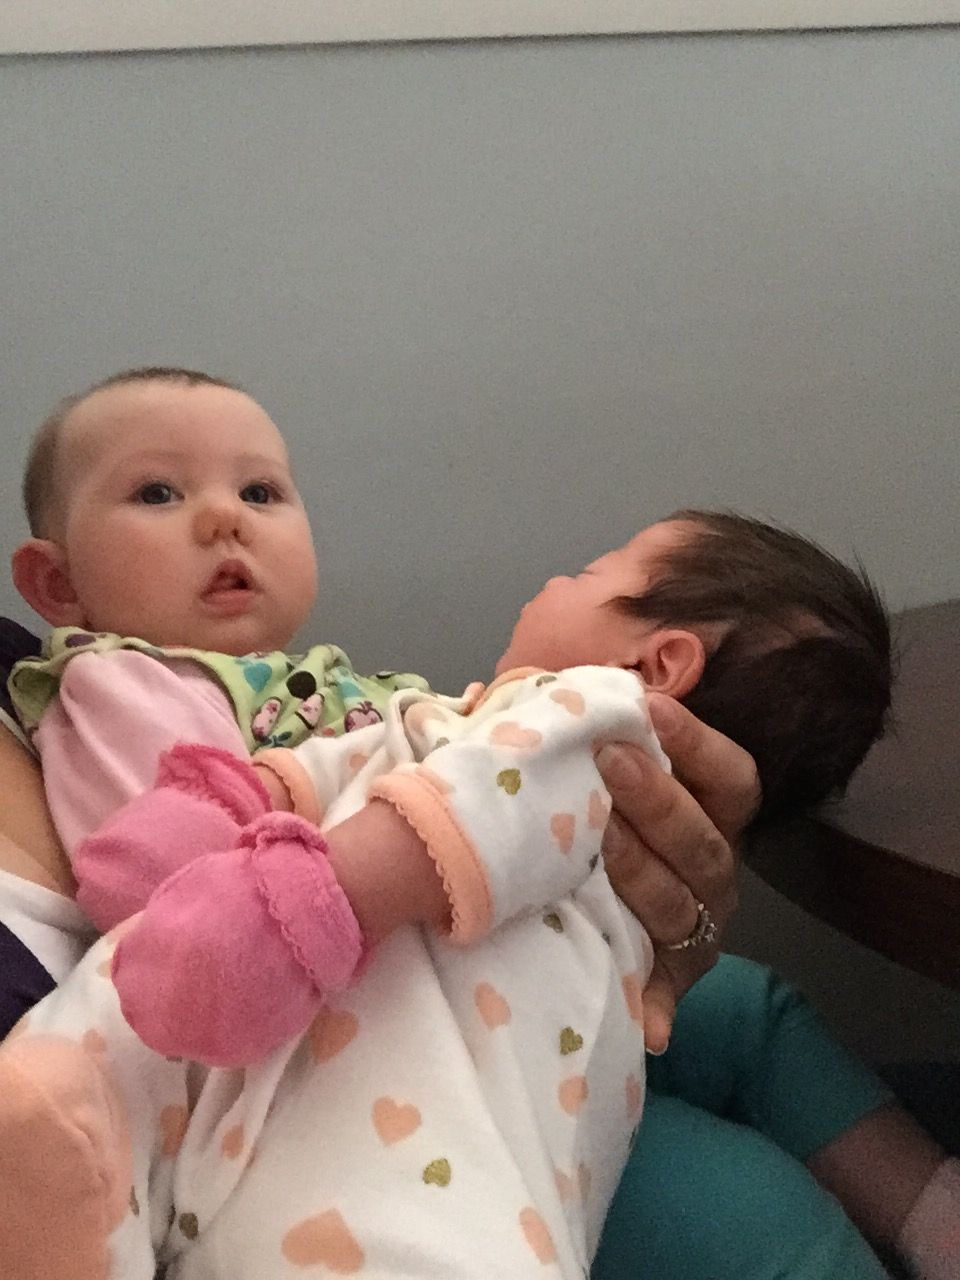  Bean and her cousin A. meeting for the first time 